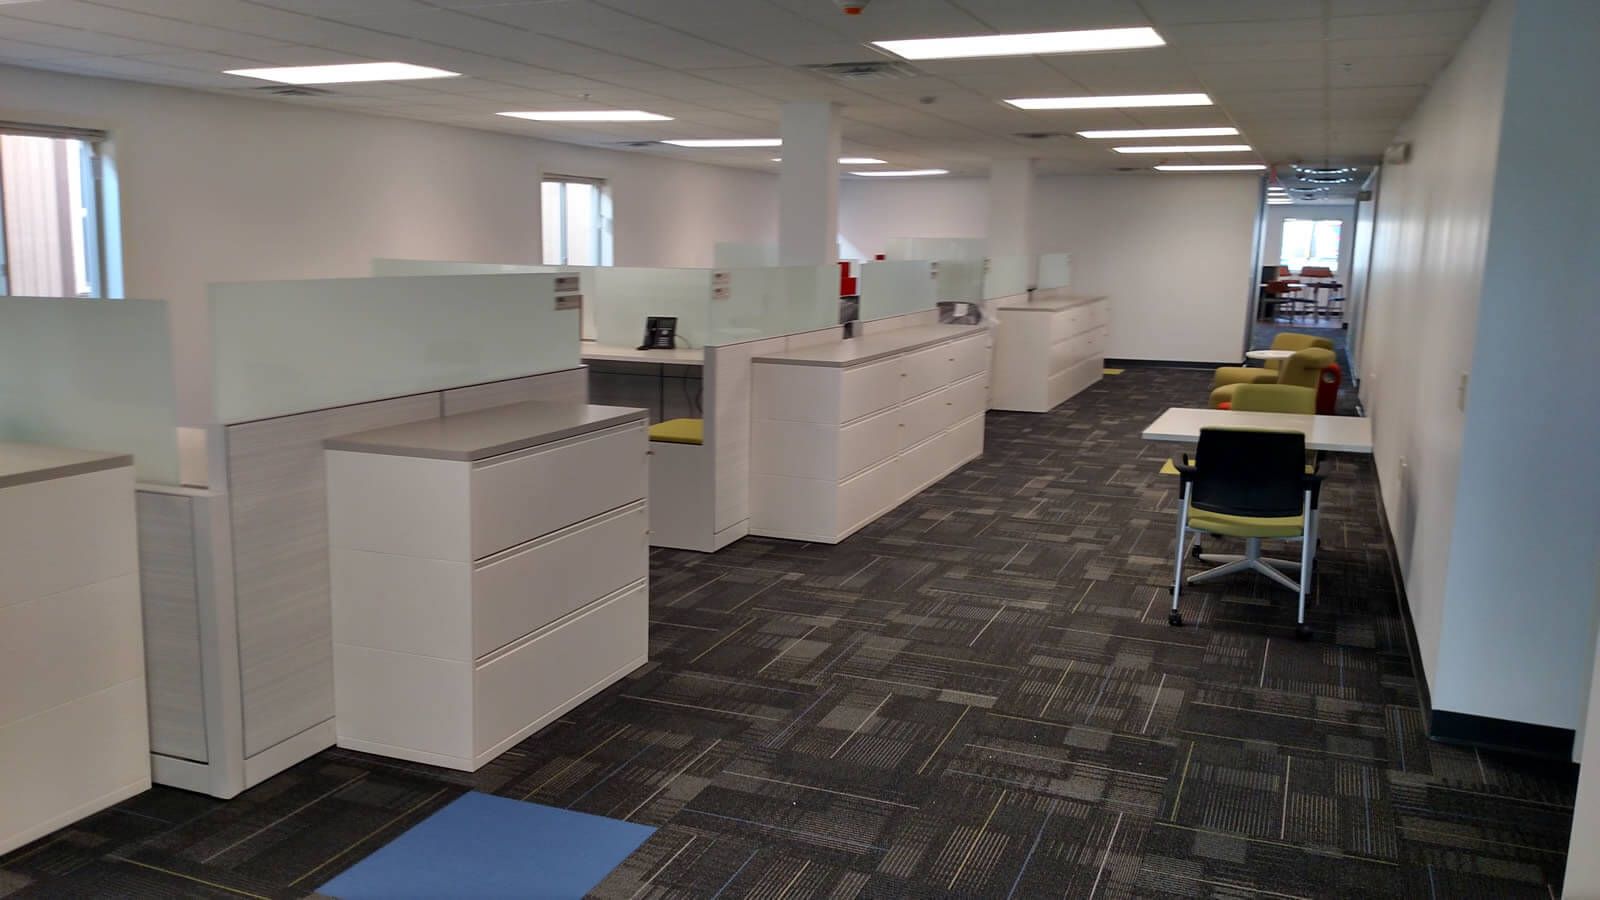 3-Story-Research-Modular-Office-Cubicle-Hallway-2